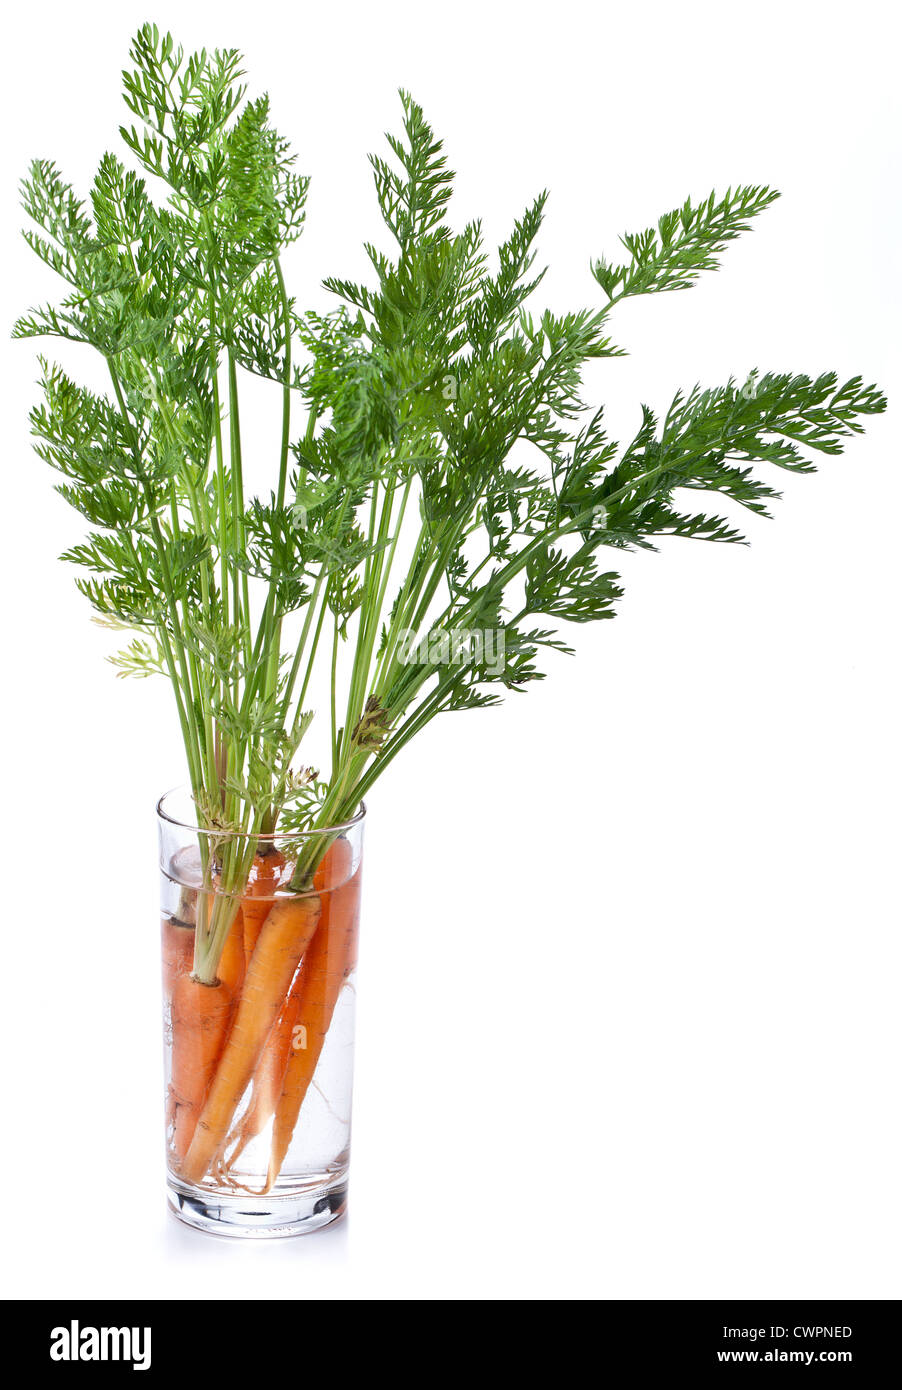 Carrots with leaves standing in a glass of water. Image on white background. Stock Photo